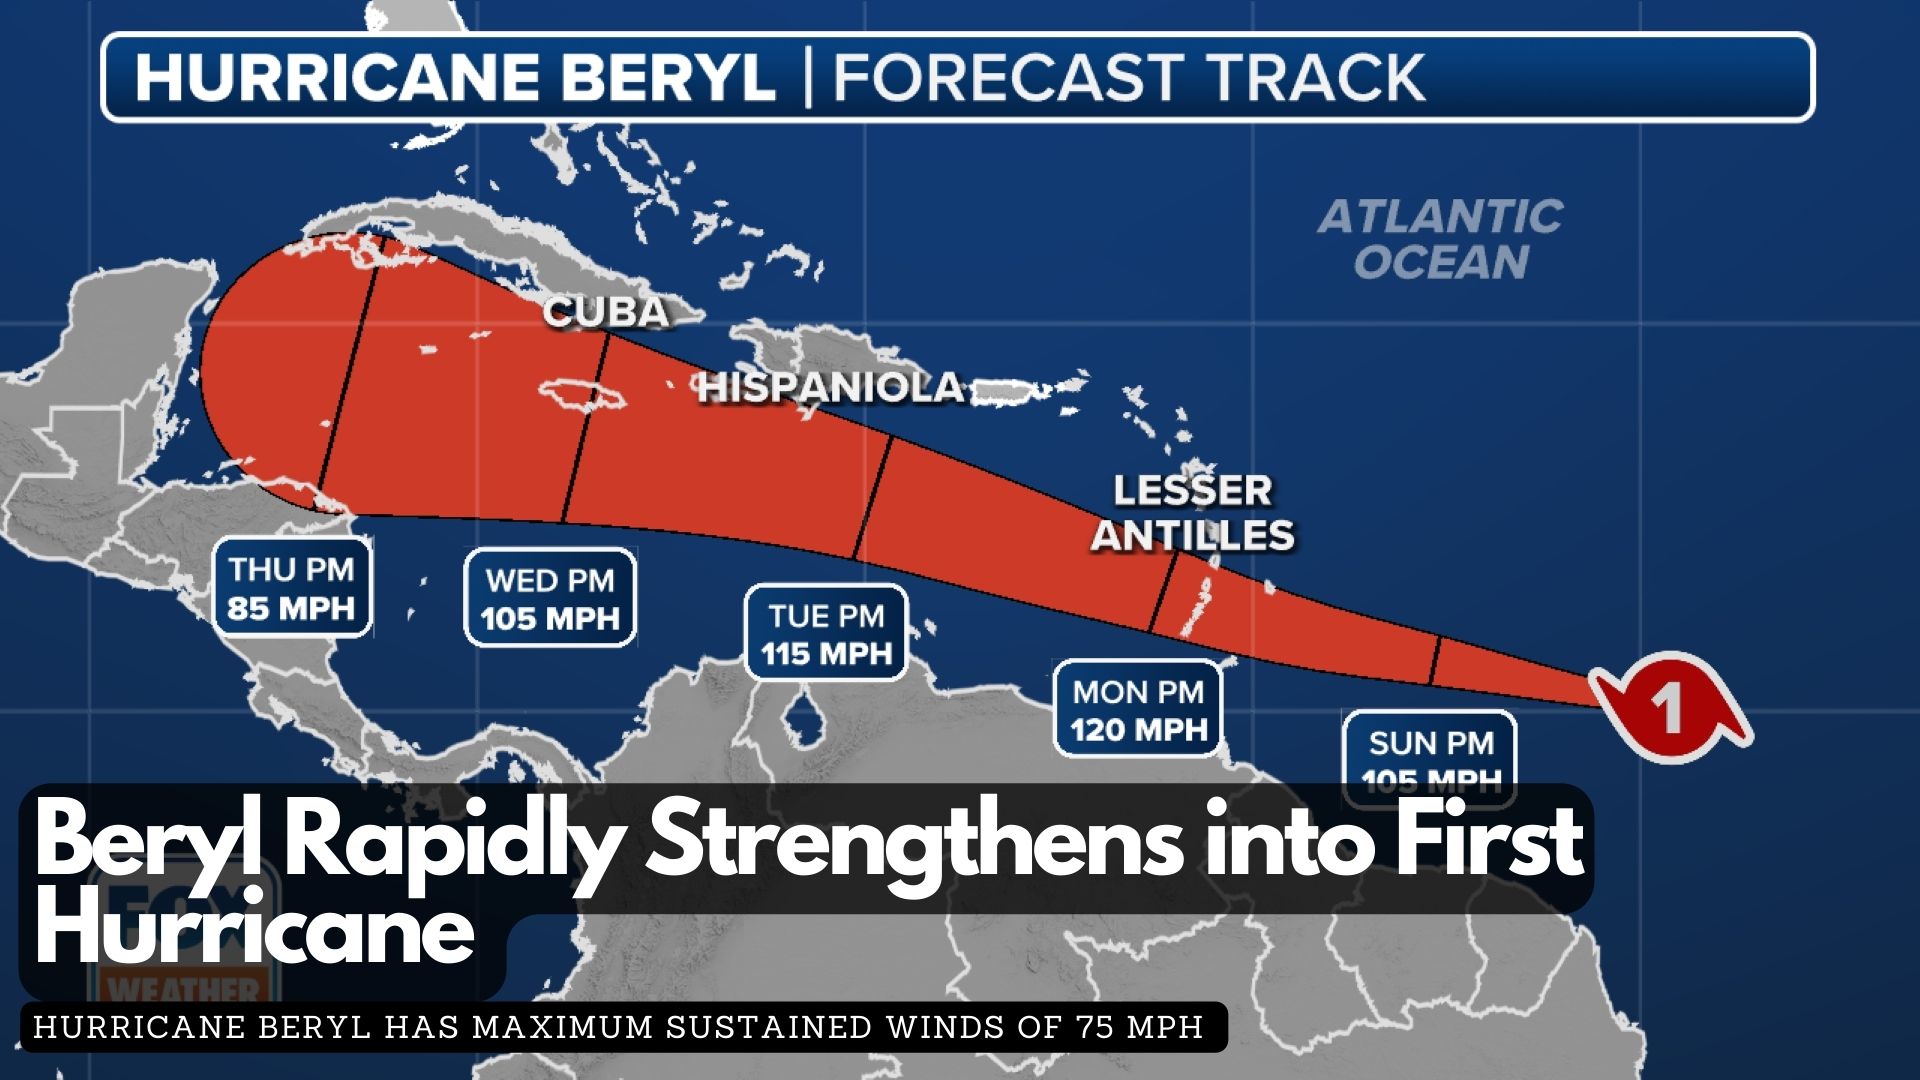 Beryl Rapidly Strengthens into First Hurricane 